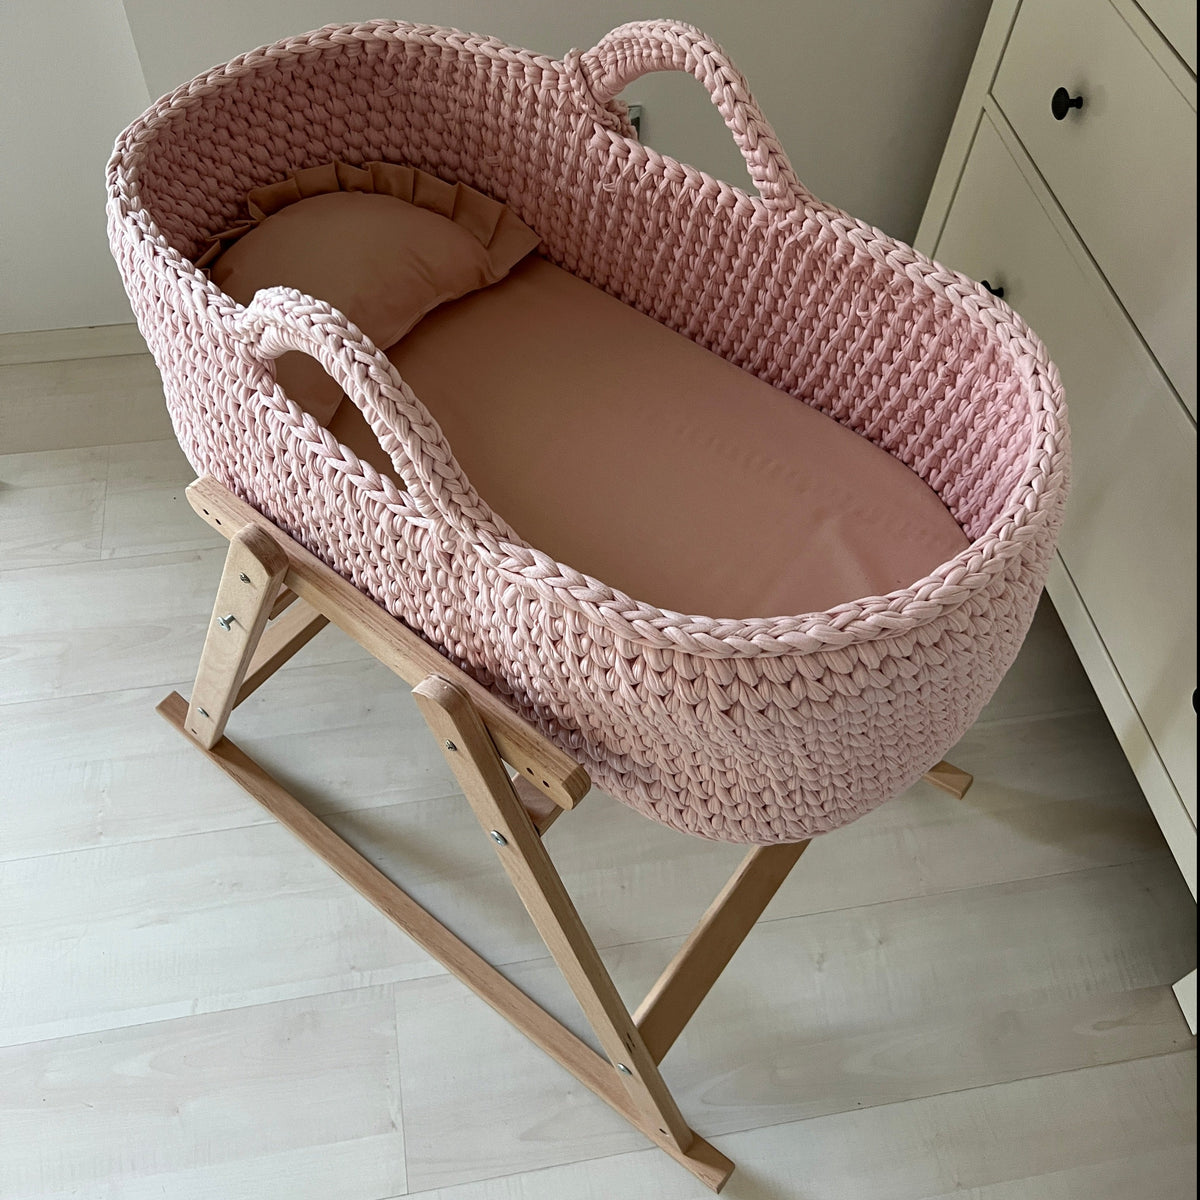 Angel Hand-Knitted Baby Bassinet - Pastel Pink